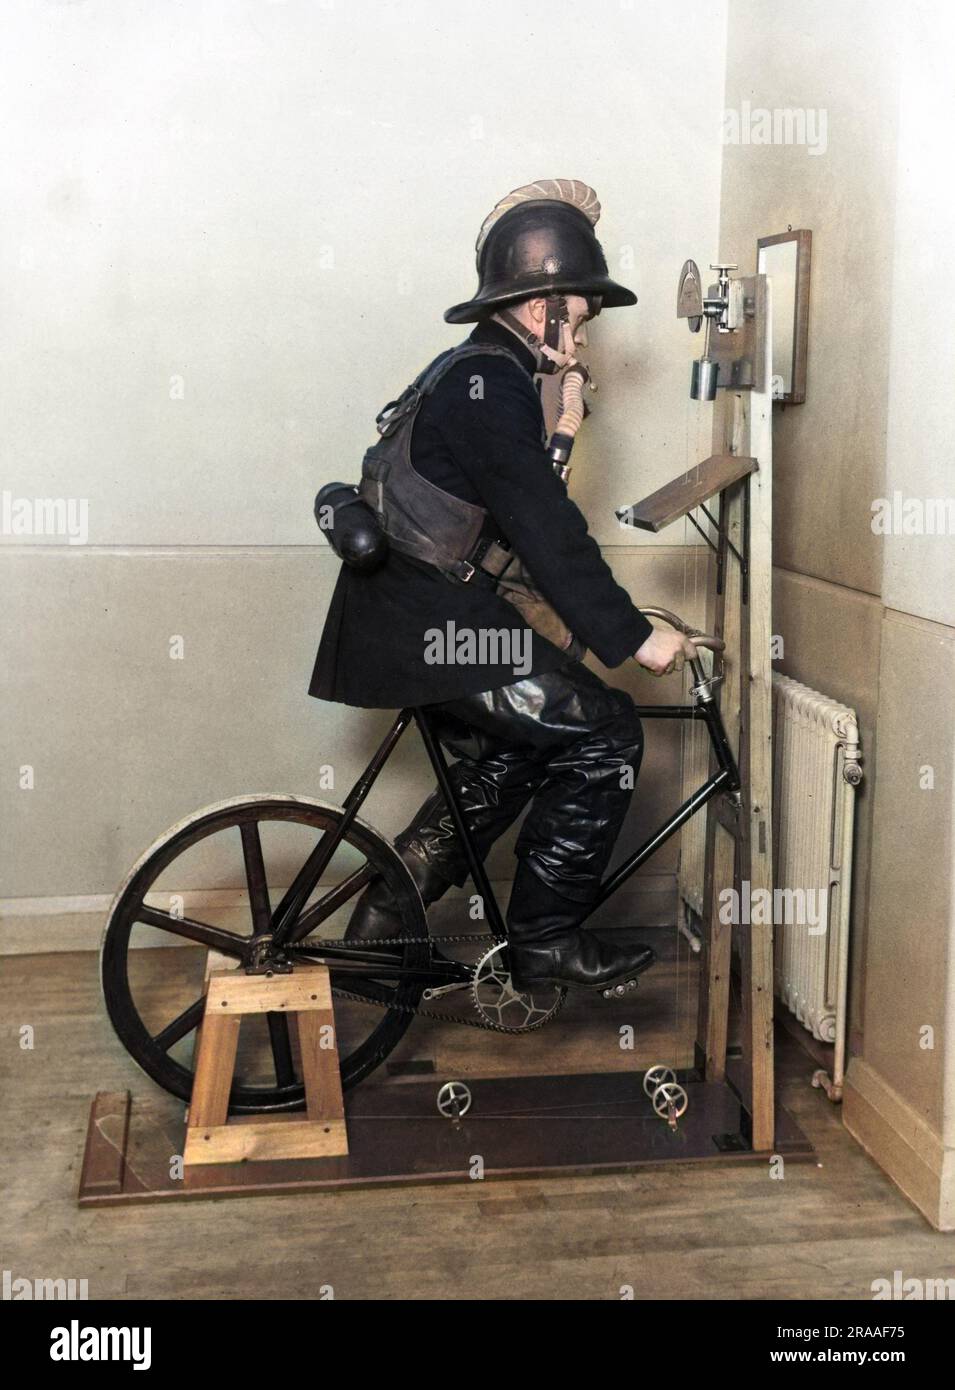 fireman-undergoing-an-ergometer-test-whilst-wearing-full-gear-including-breathing-apparatus-at-lambeth-headquarters-date-1950s-2RAAF75.jpg